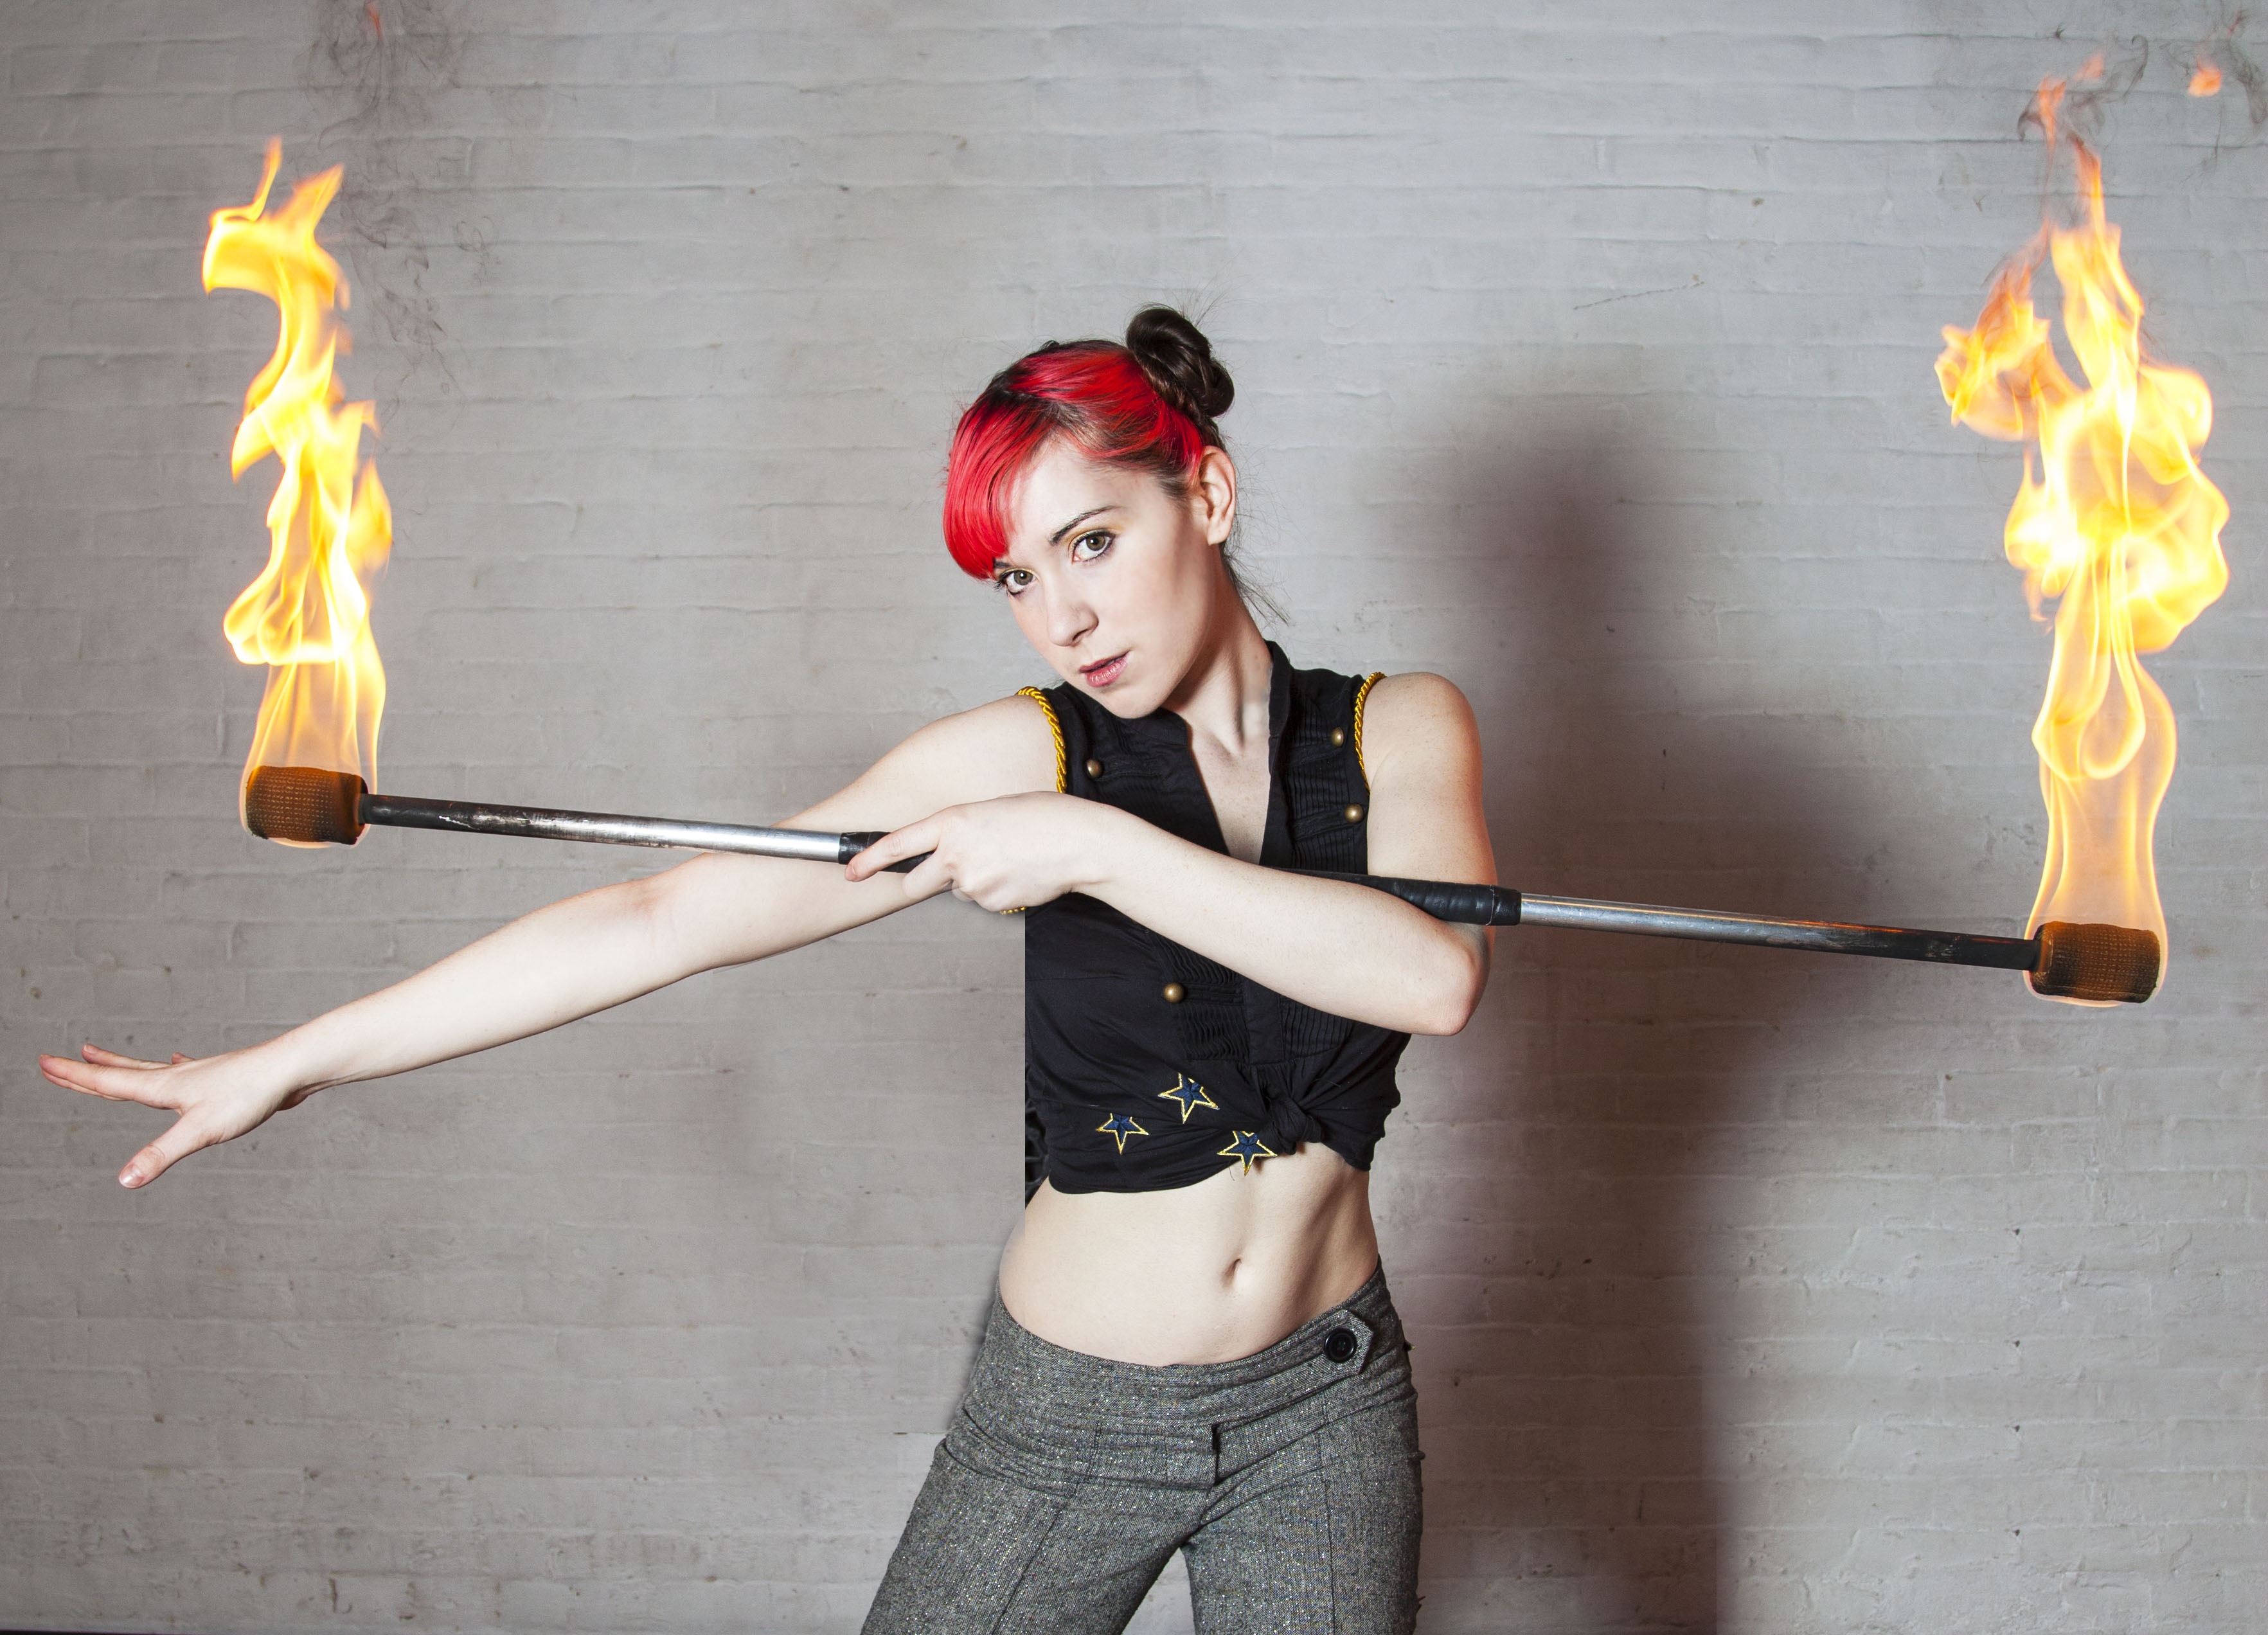 Fire Staff Image by Undiscovered Photography